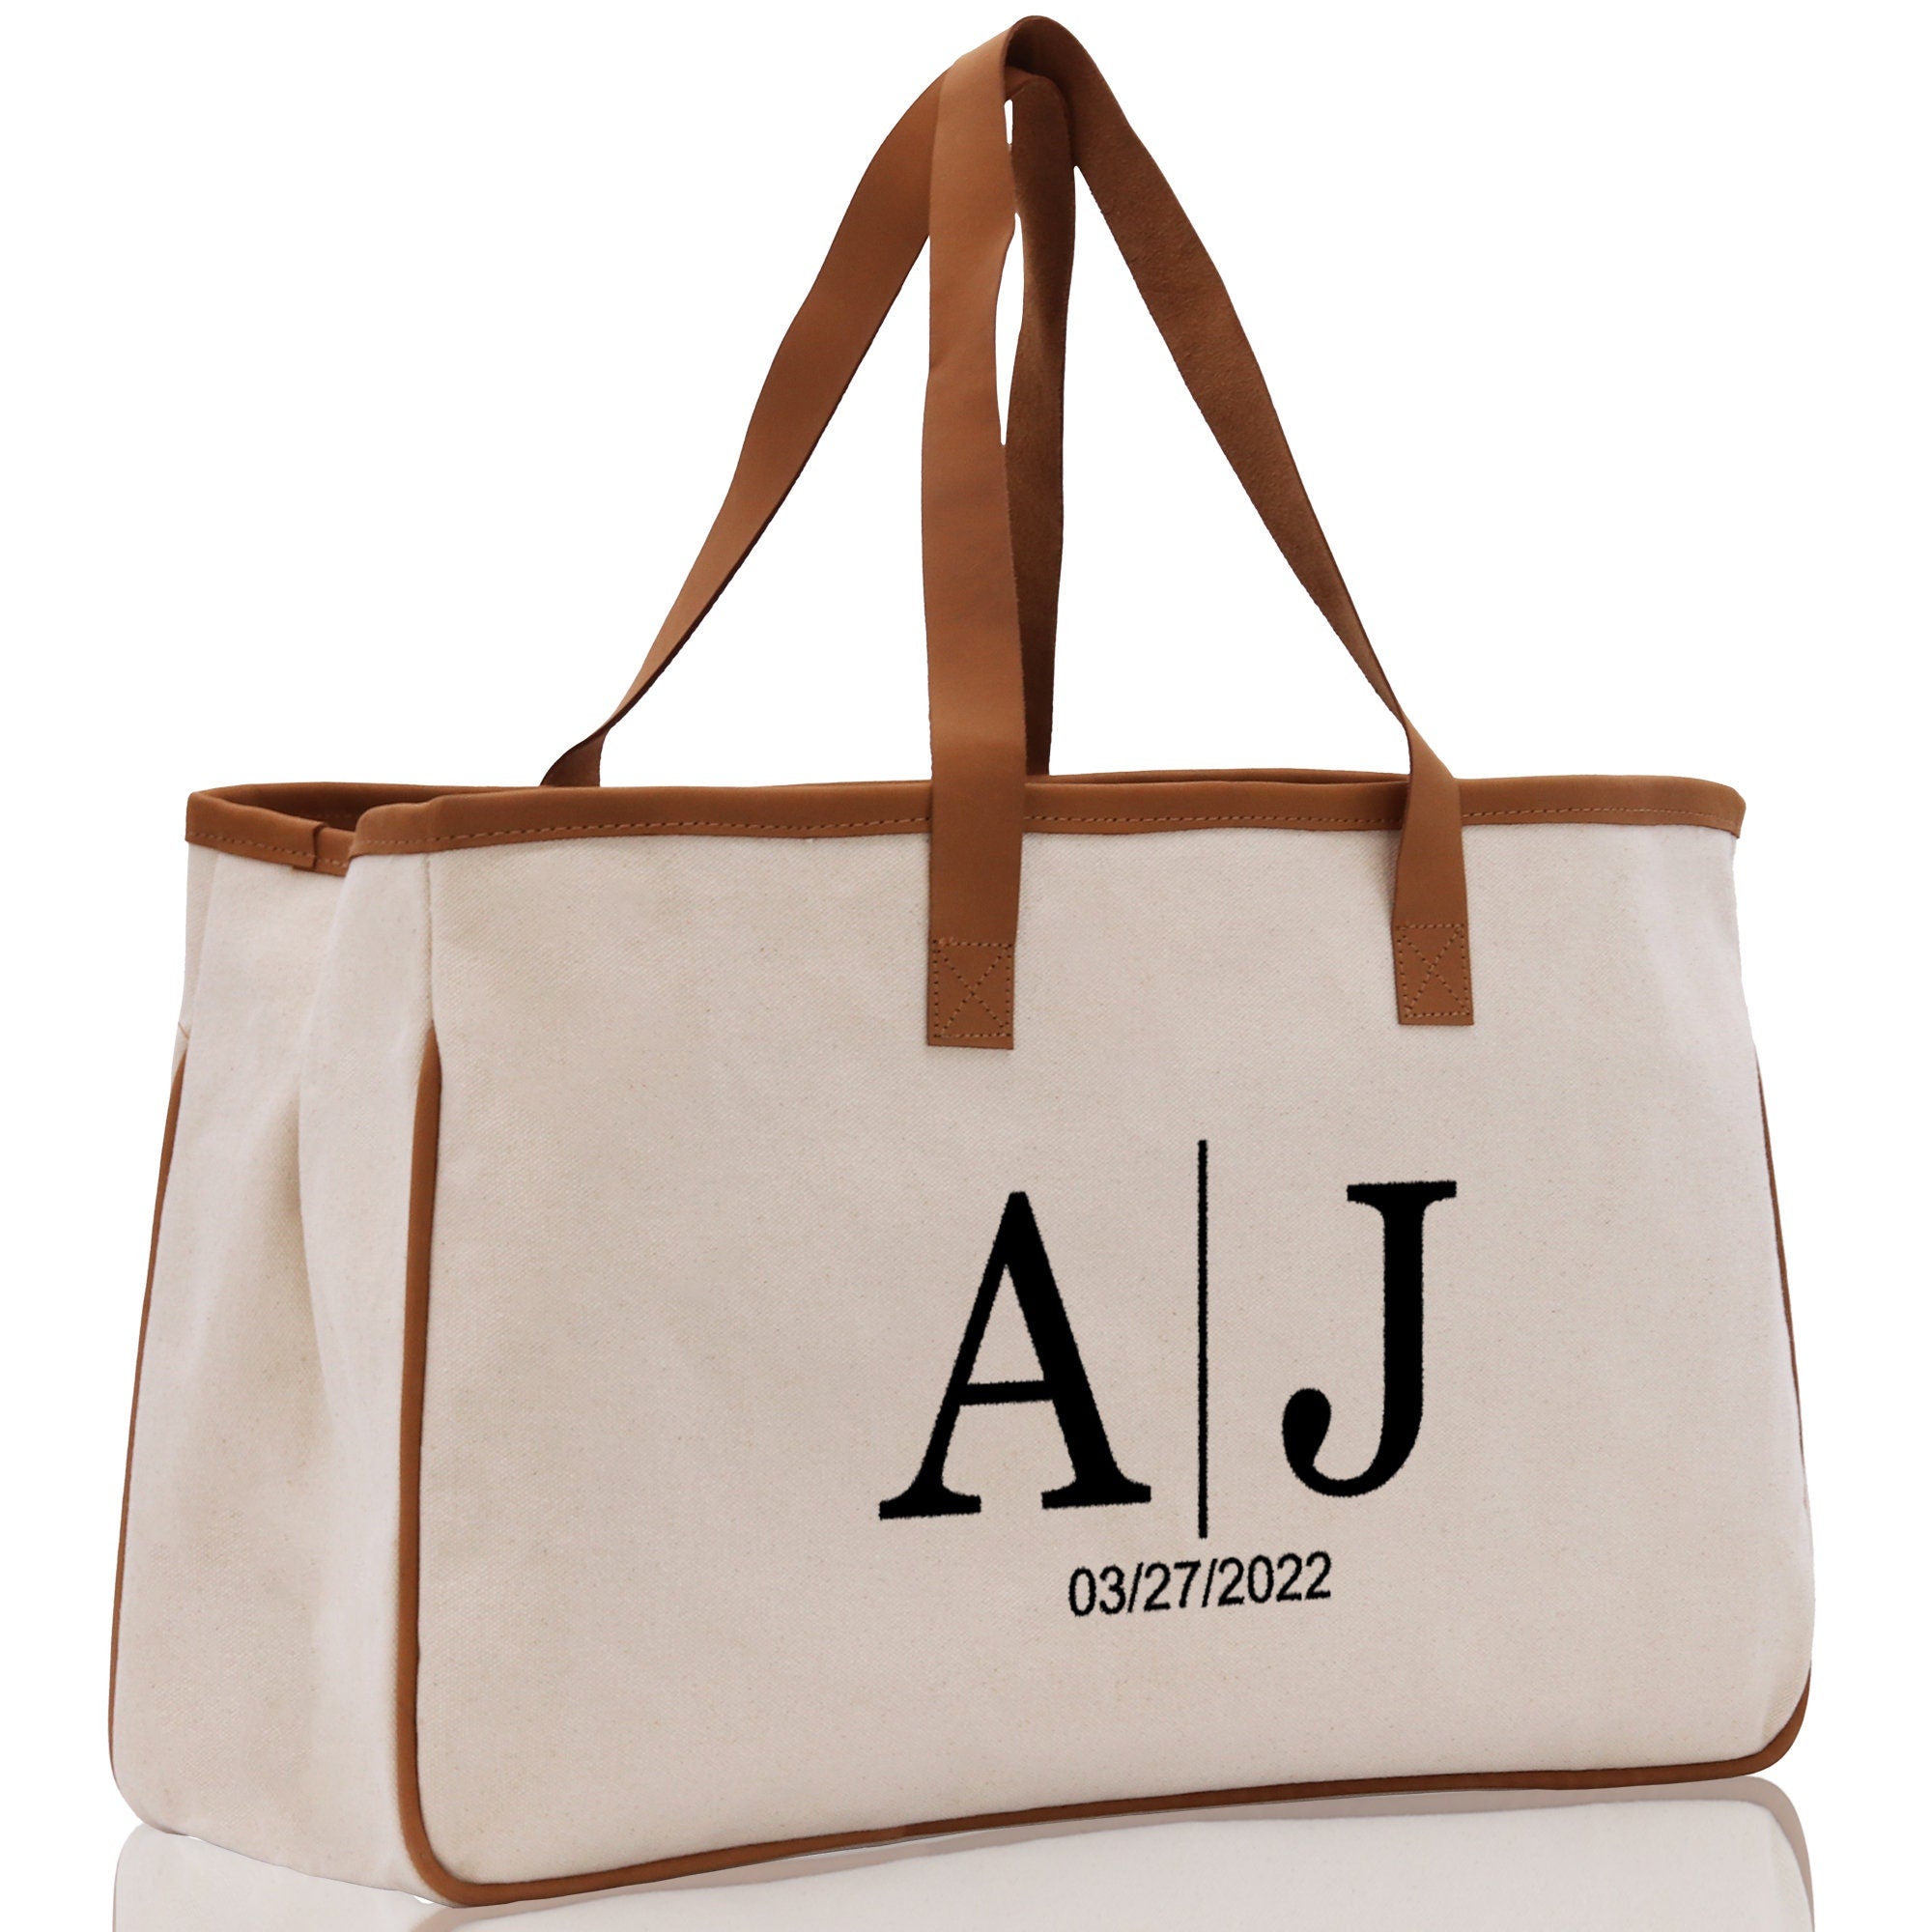 Initials and Date Customized Embroidered Tote Bag 100% Cotton Canvas and Chic Personalized Tote Bag for Bridesmaid Anniversary Wedding Day